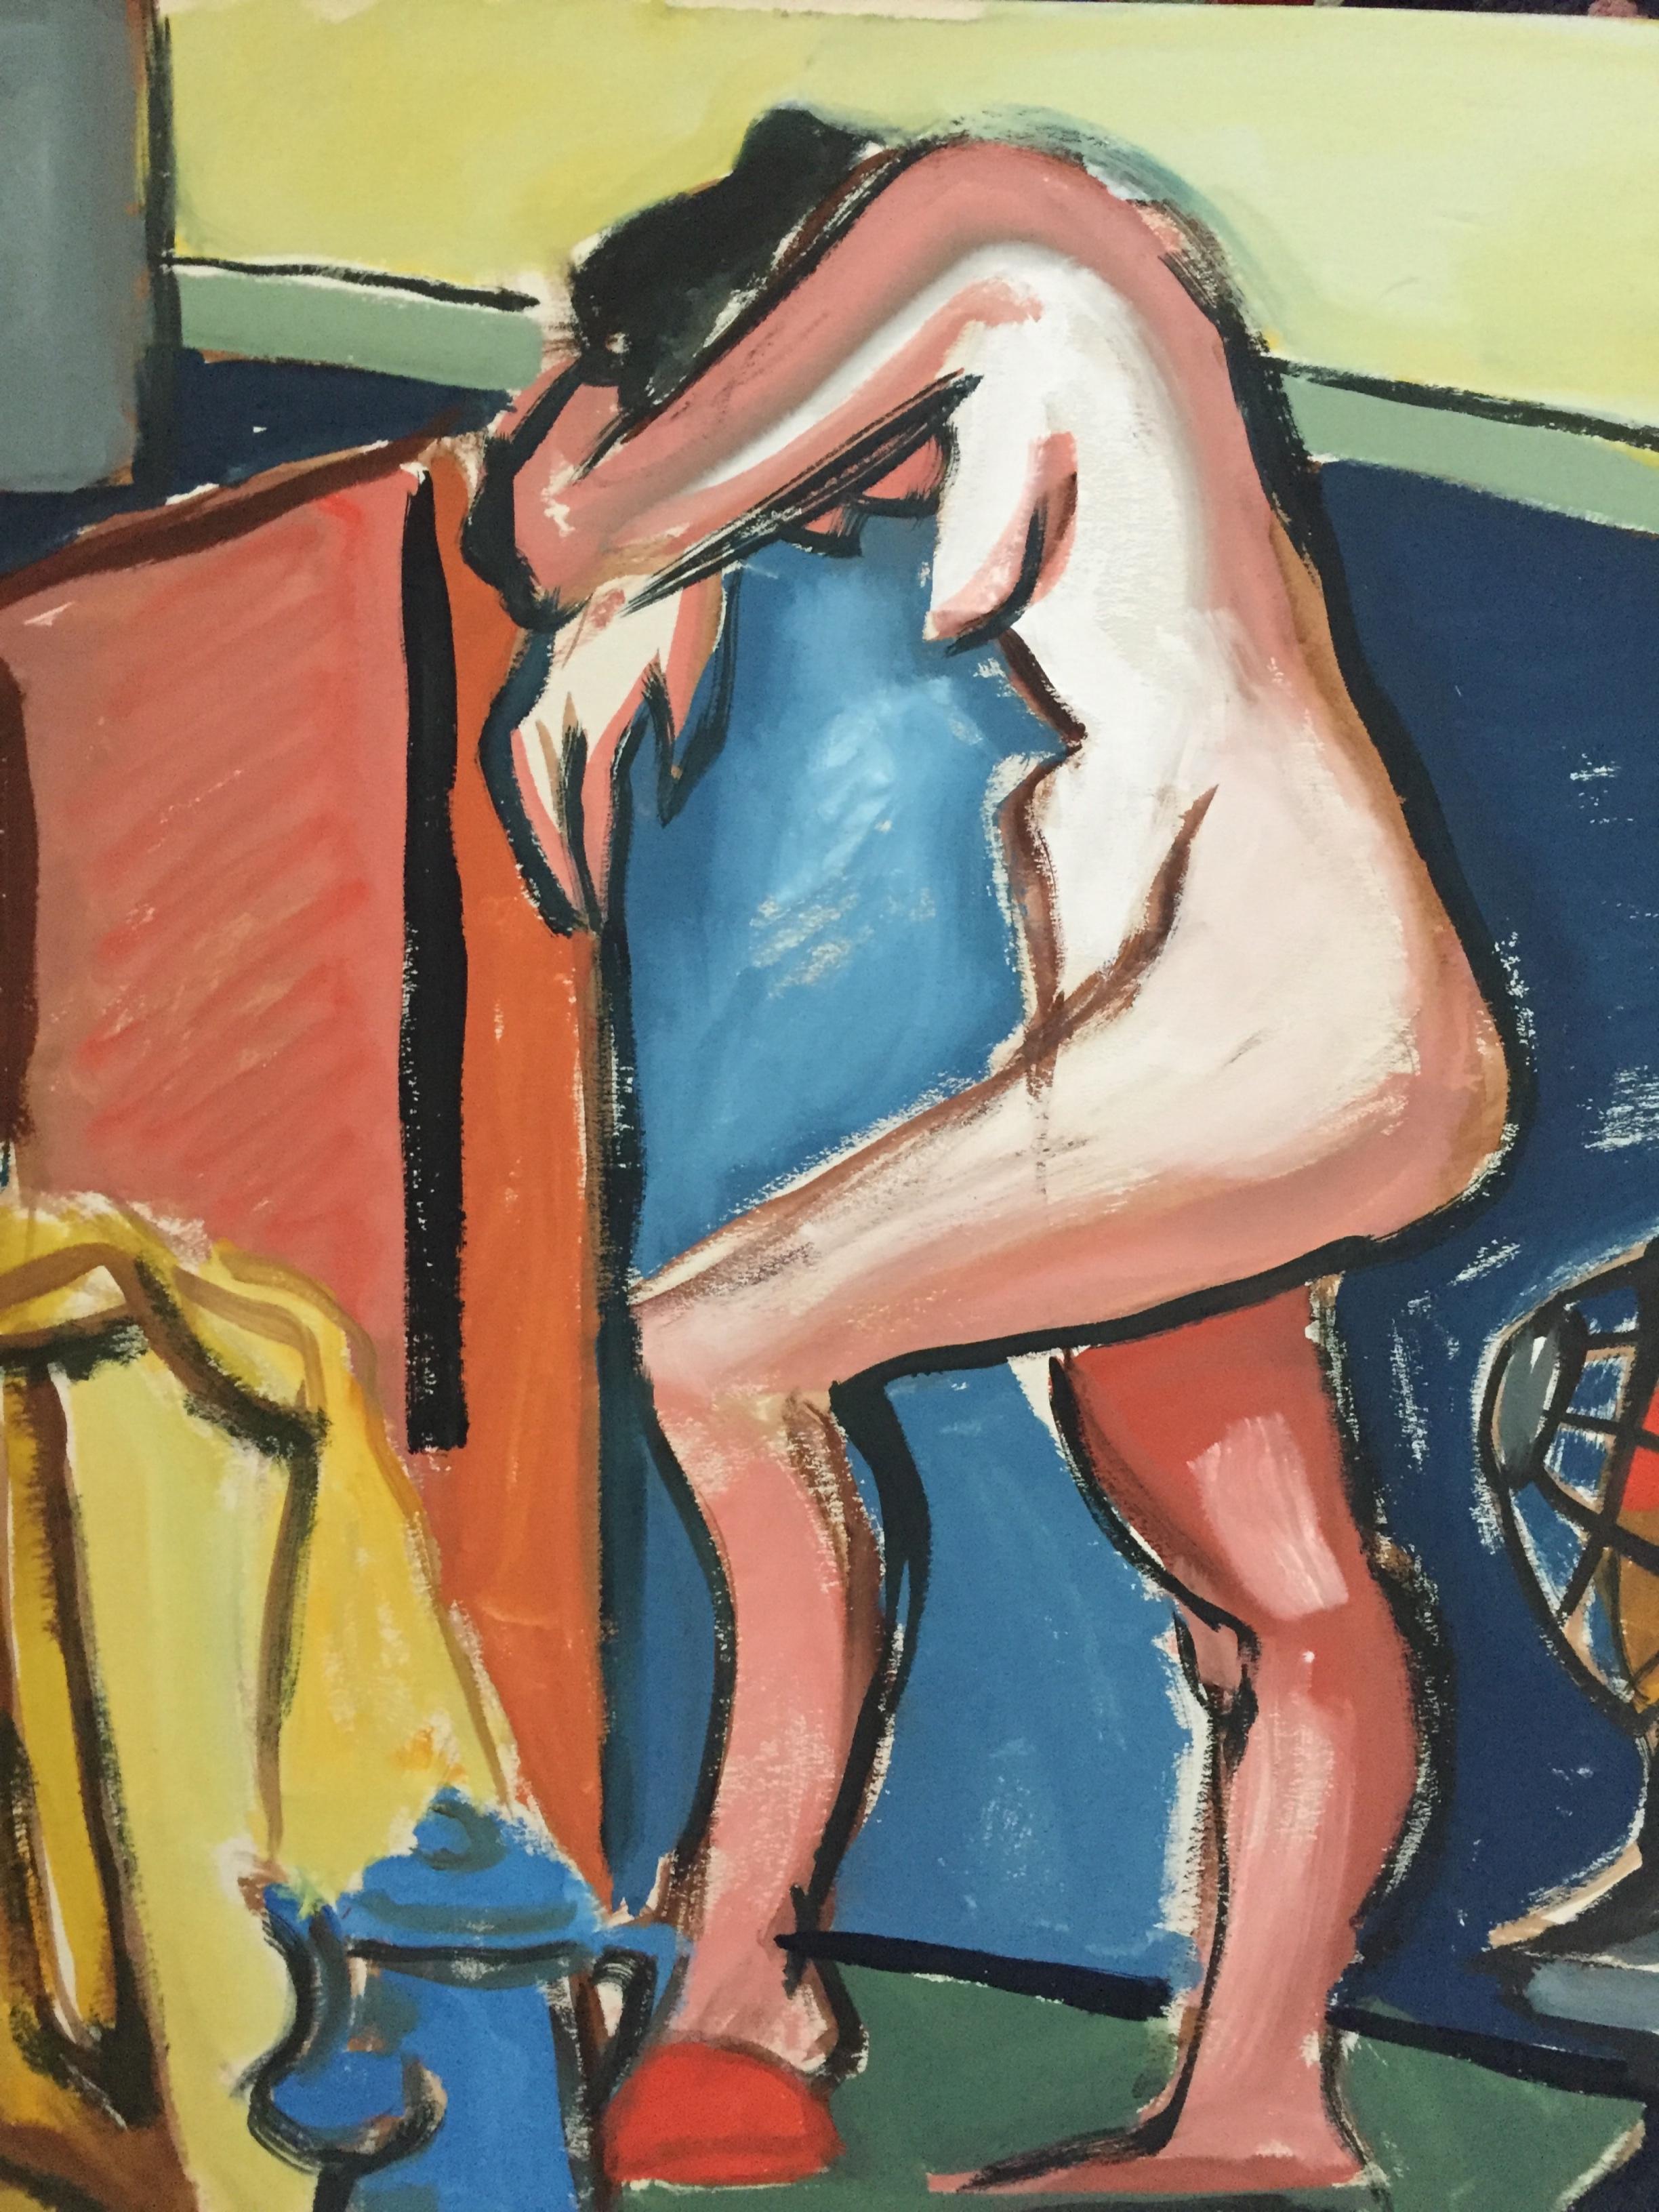 From the estate of Jerry Opper & Ruth Friedman Opper
Too Much
c. 1940-1950's
Gouache on Paper
15